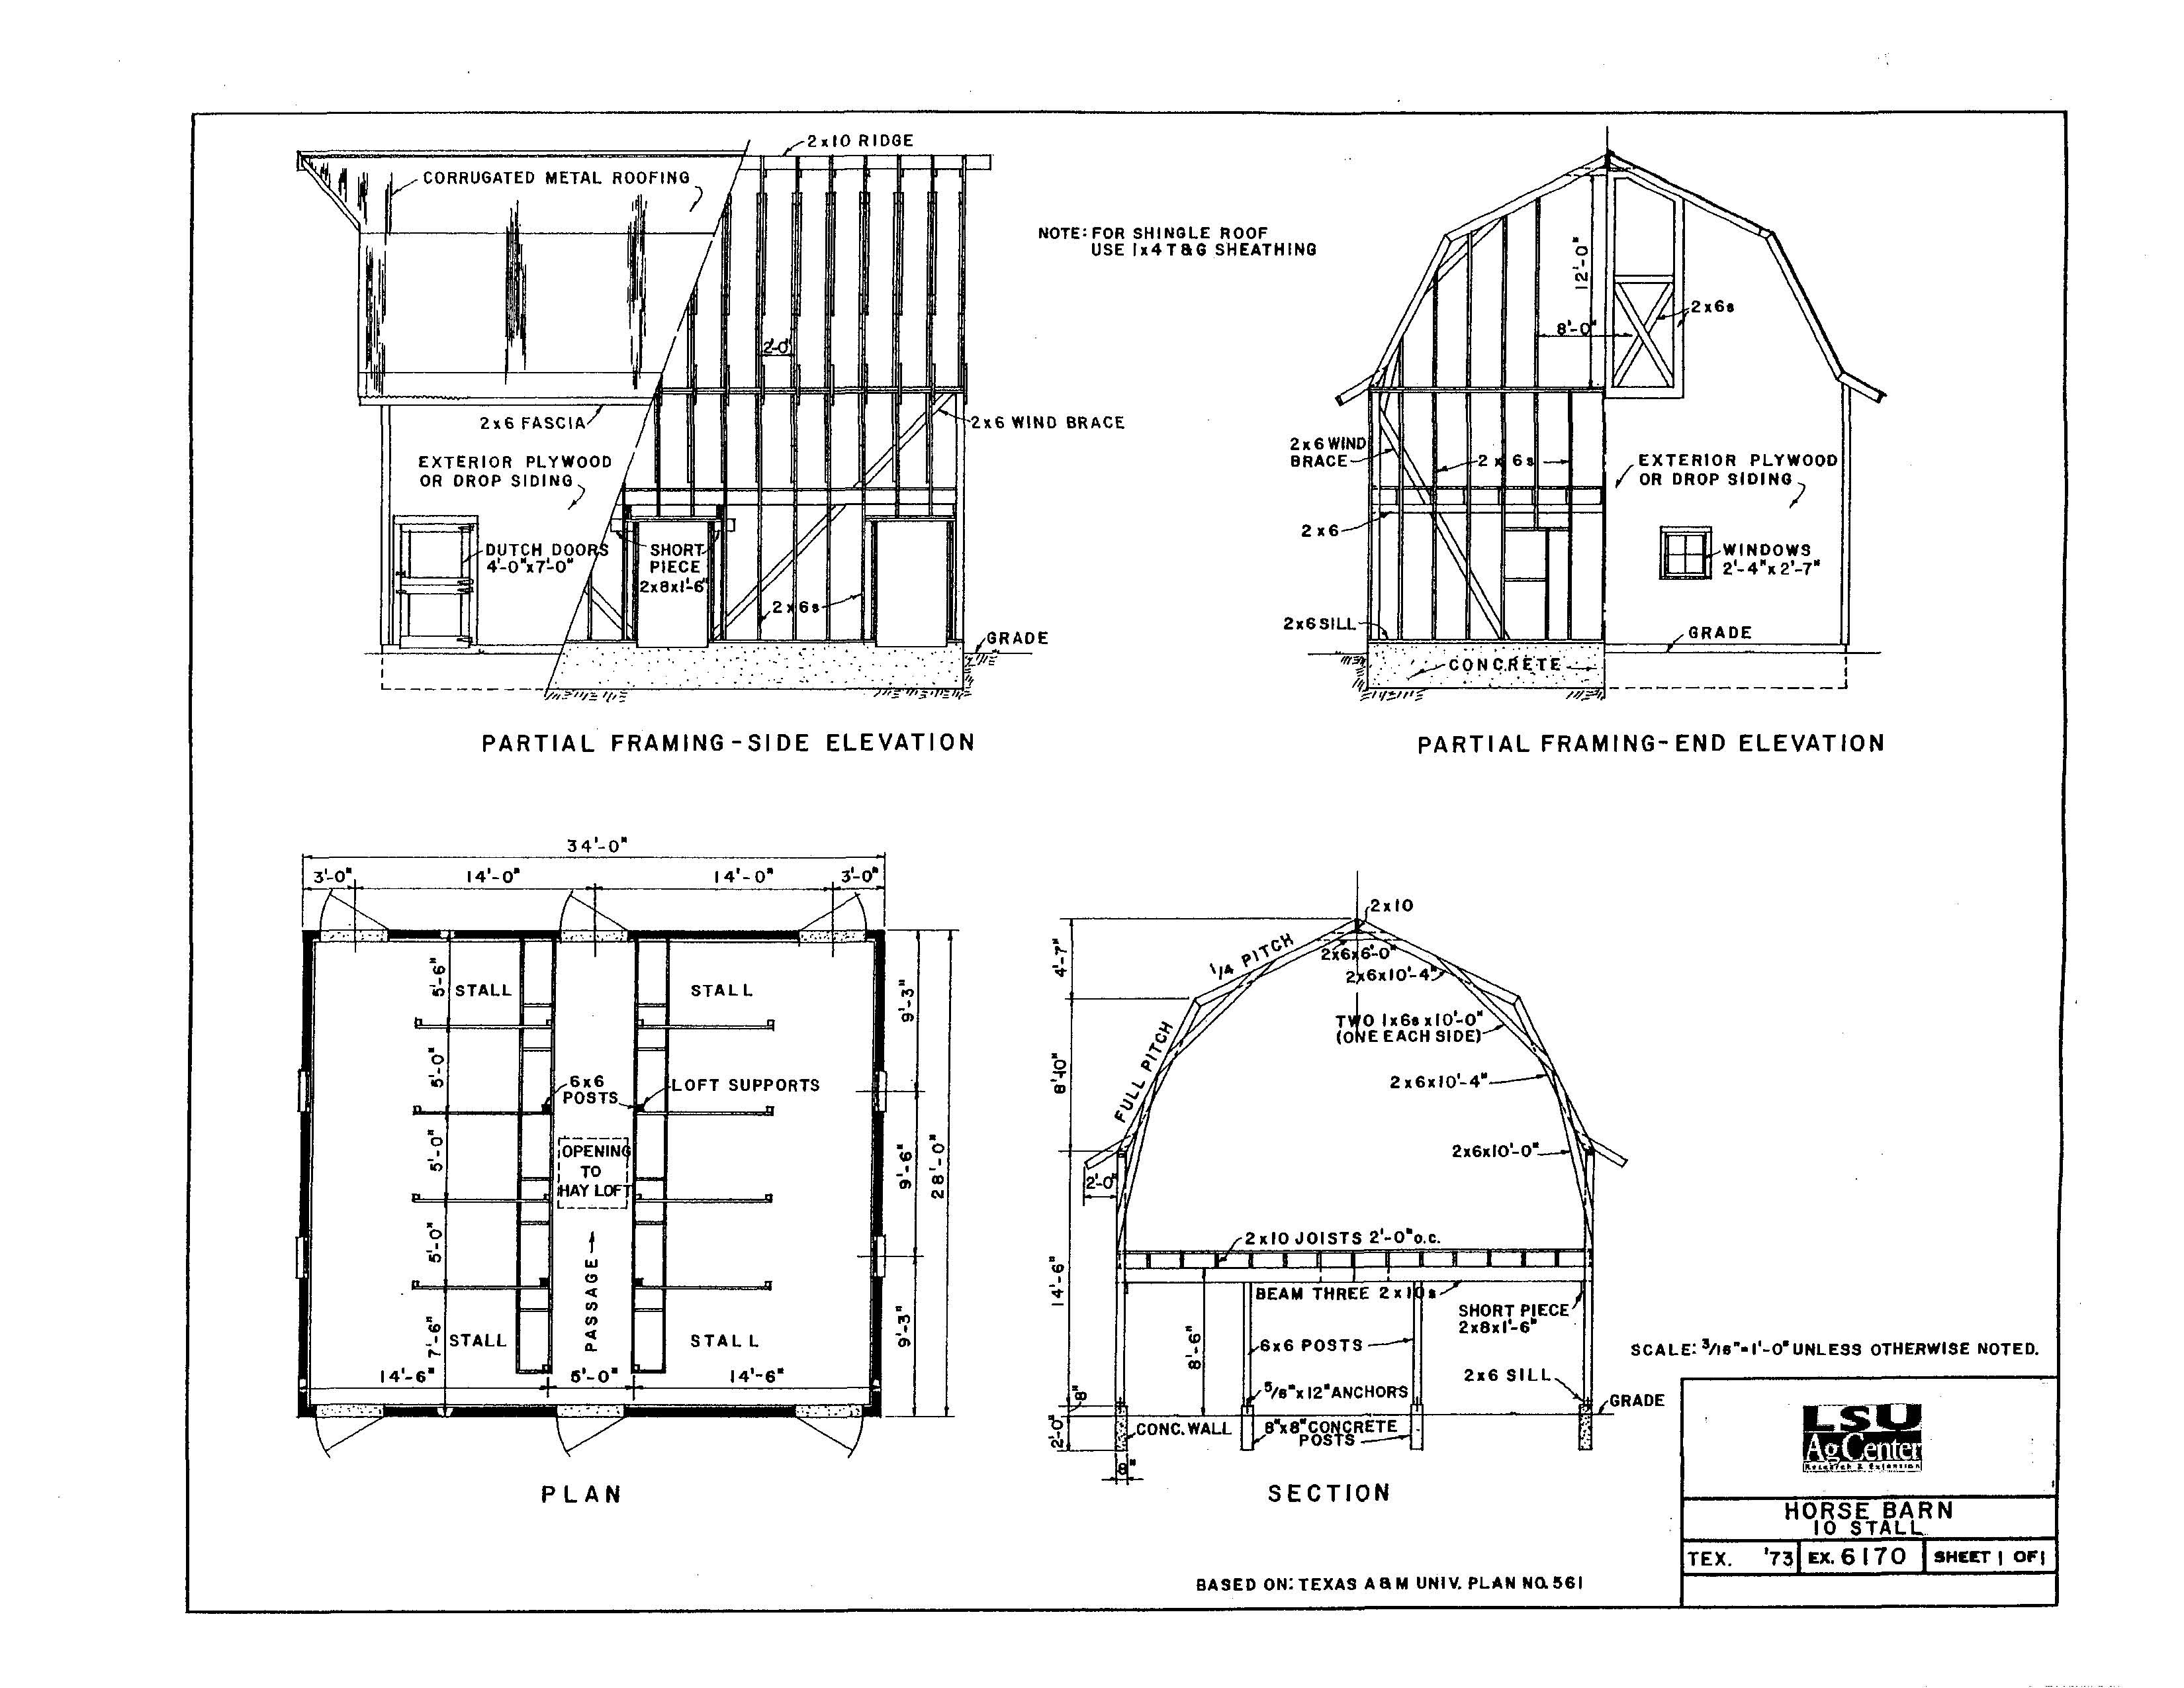 I learn The woodworking project: Guide Barn birdhouse plans free